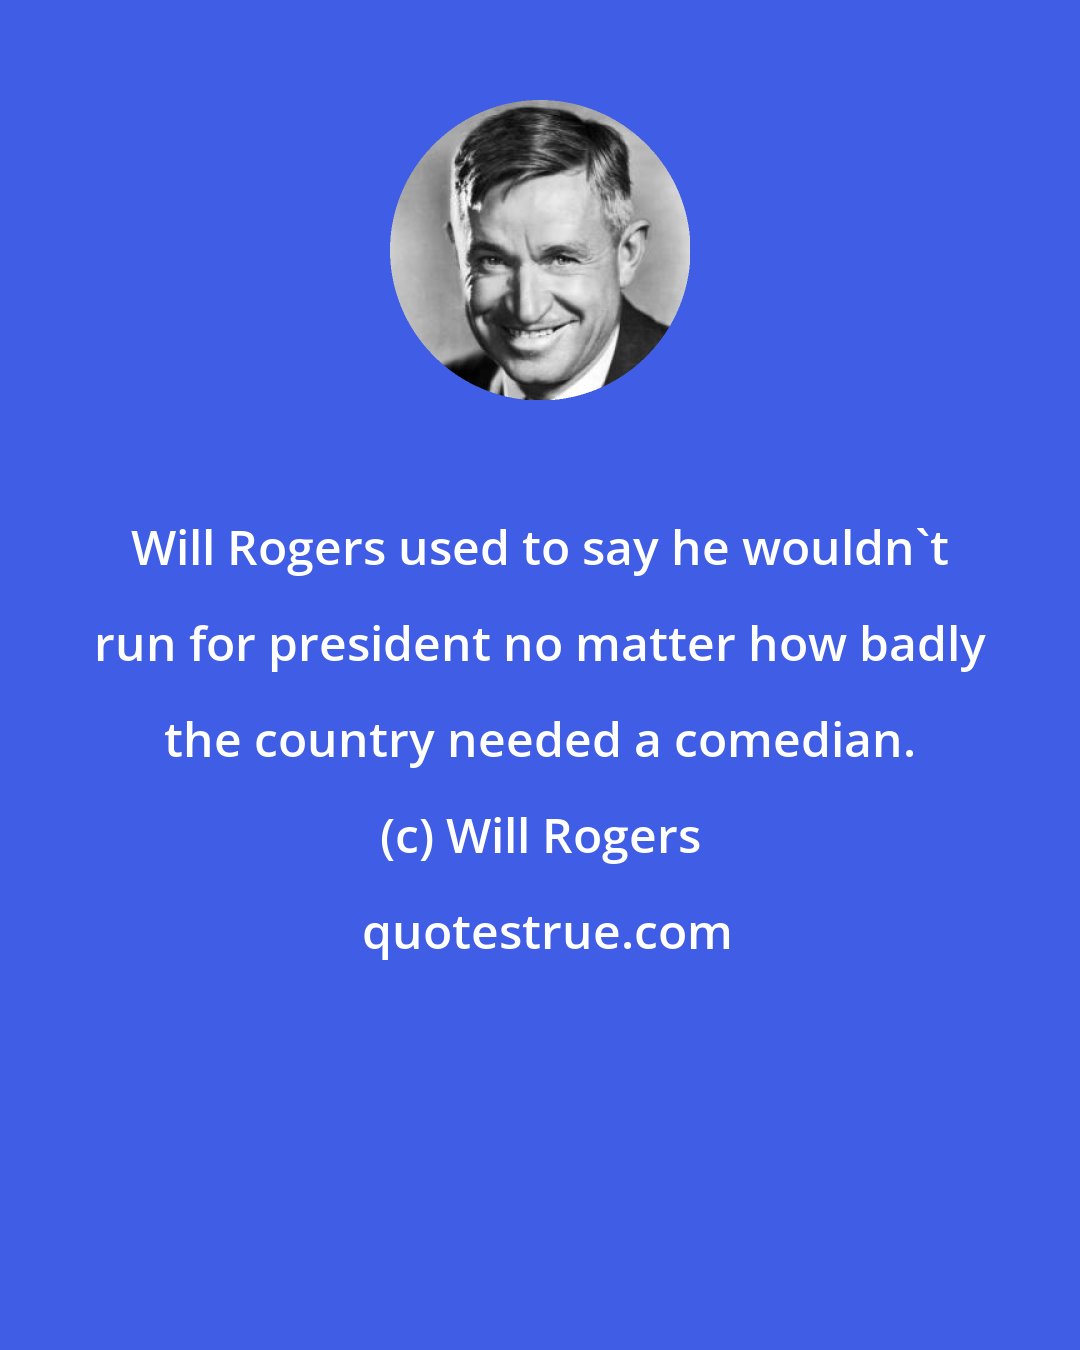 Will Rogers: Will Rogers used to say he wouldn't run for president no matter how badly the country needed a comedian.